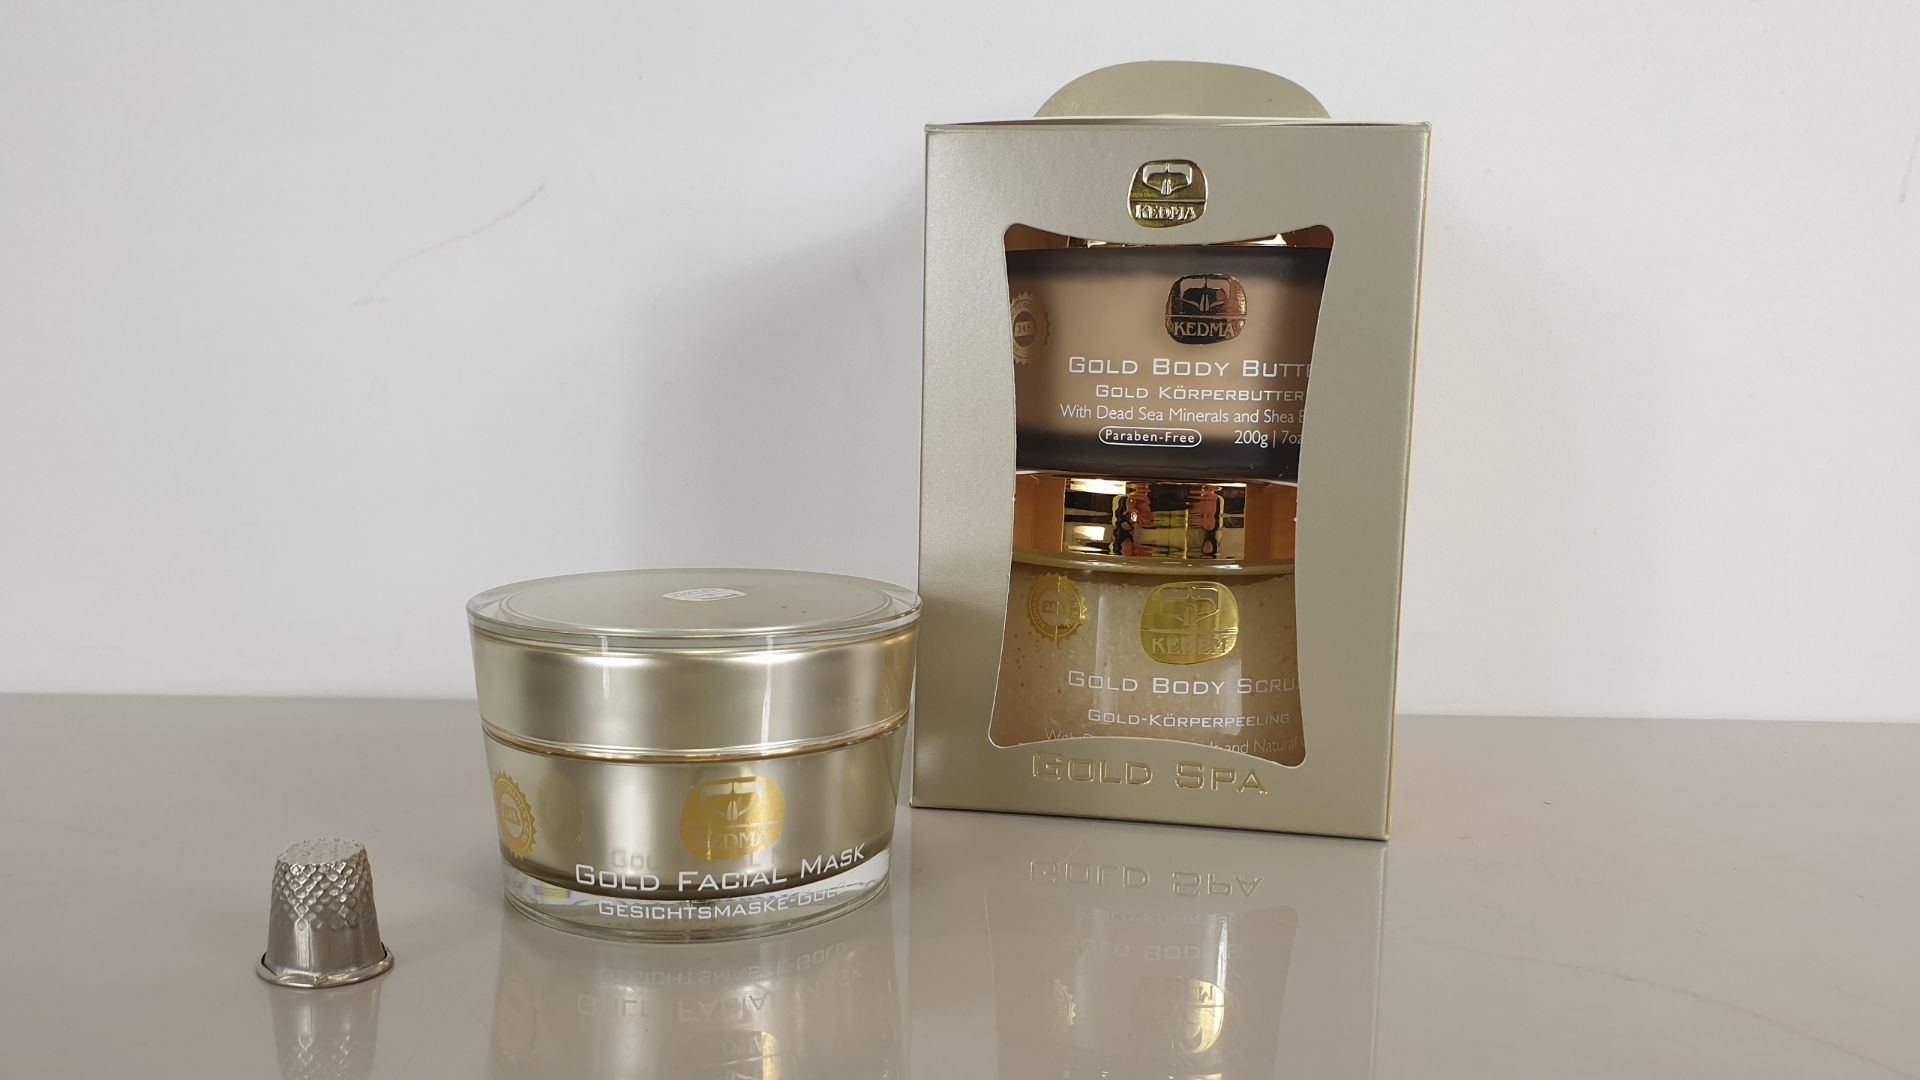 MIXED LOT CONTAINING KEDMA GOLD SPA - GOLD BODY BUTTER, GOLD BODY SCRUB AND GOLD FACIAL MASK ALL